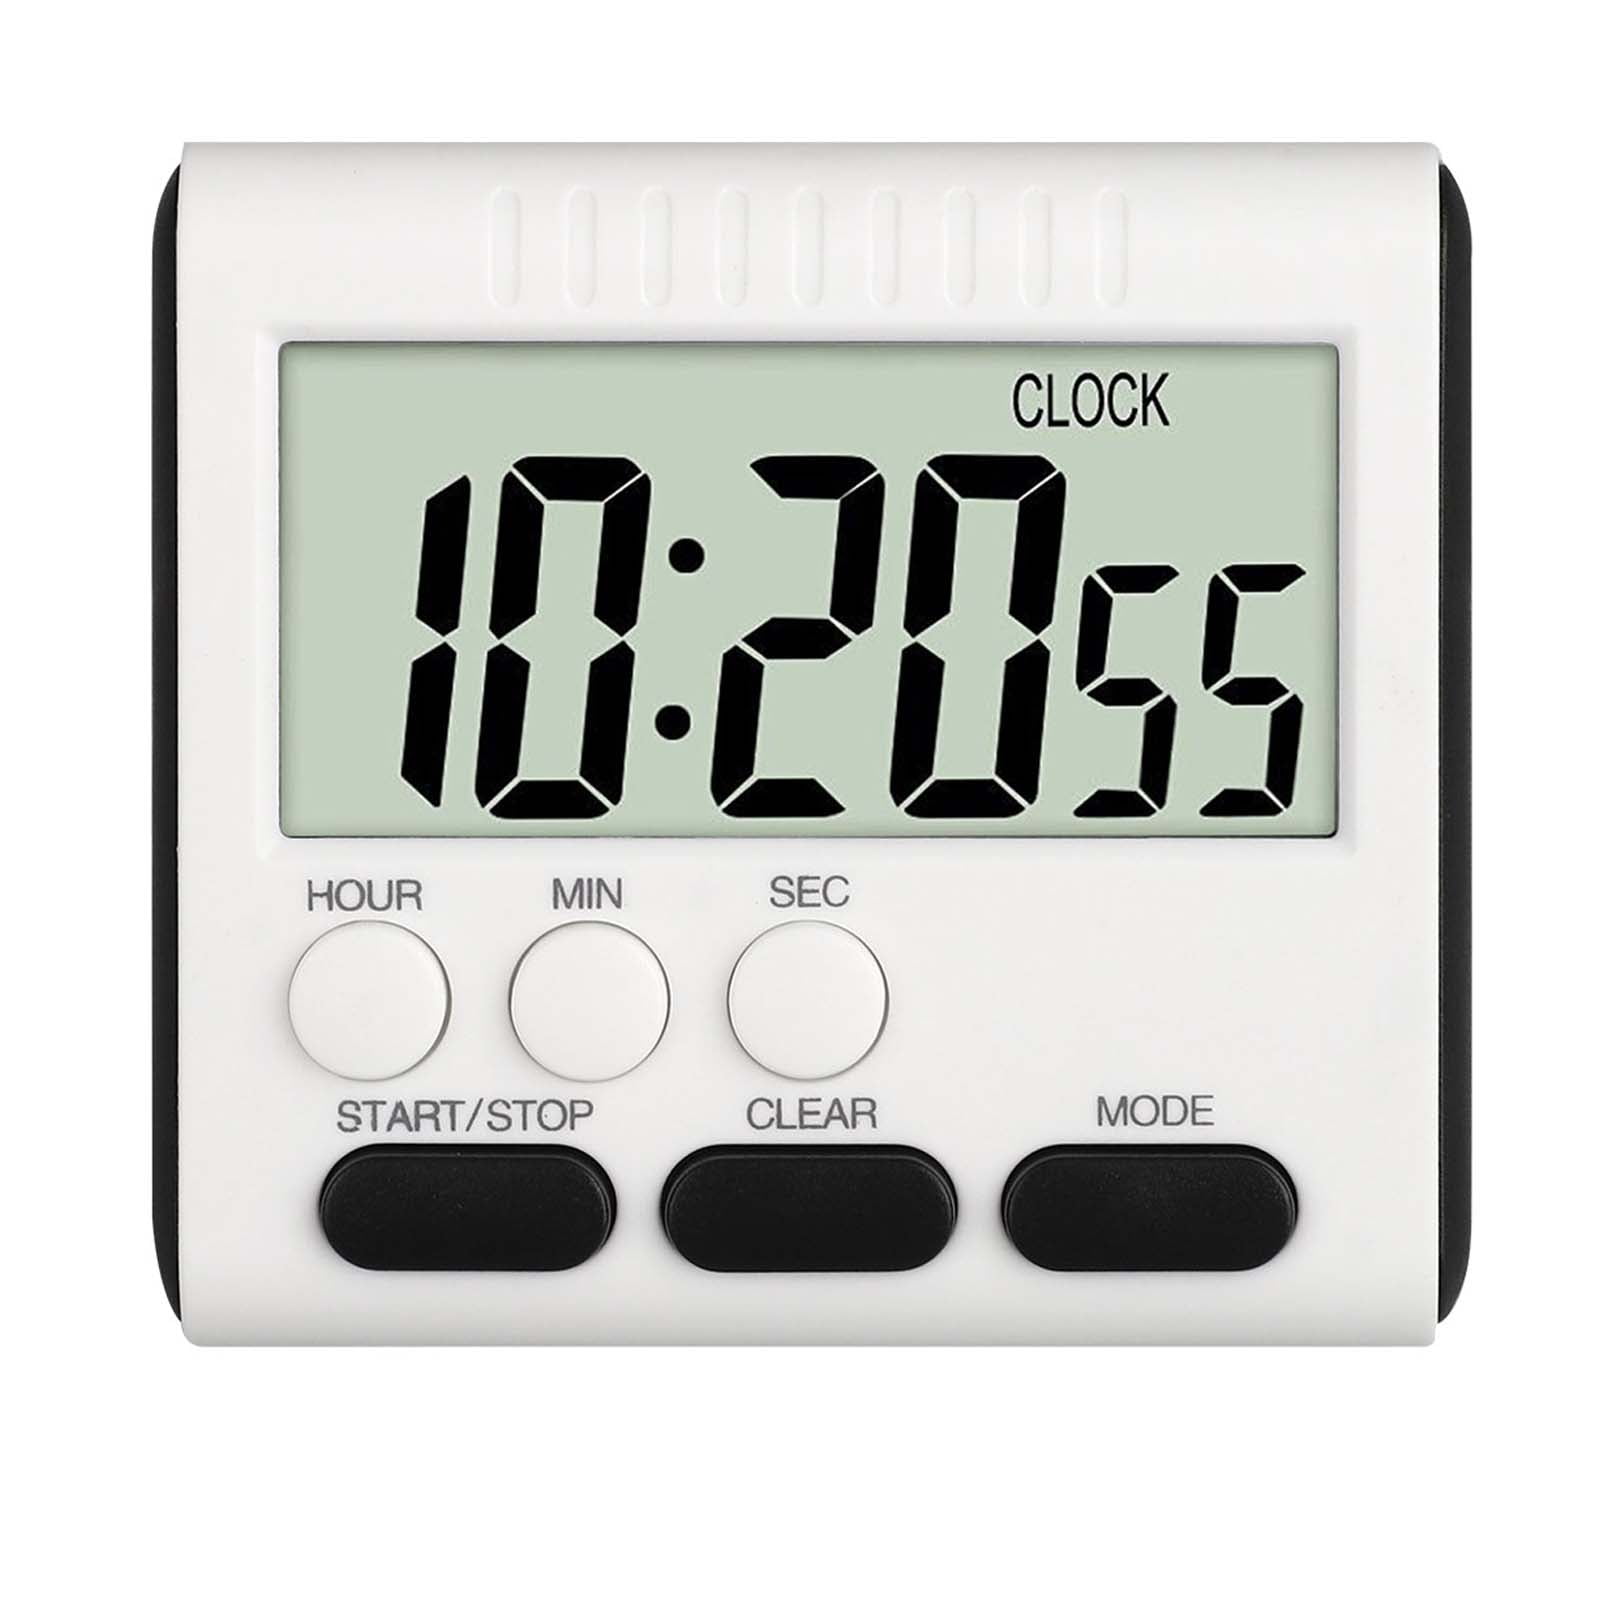 Large Digital LCD Kitchen Cooking Timers Count-Down Up Clock Alarm Magnetic 2019 